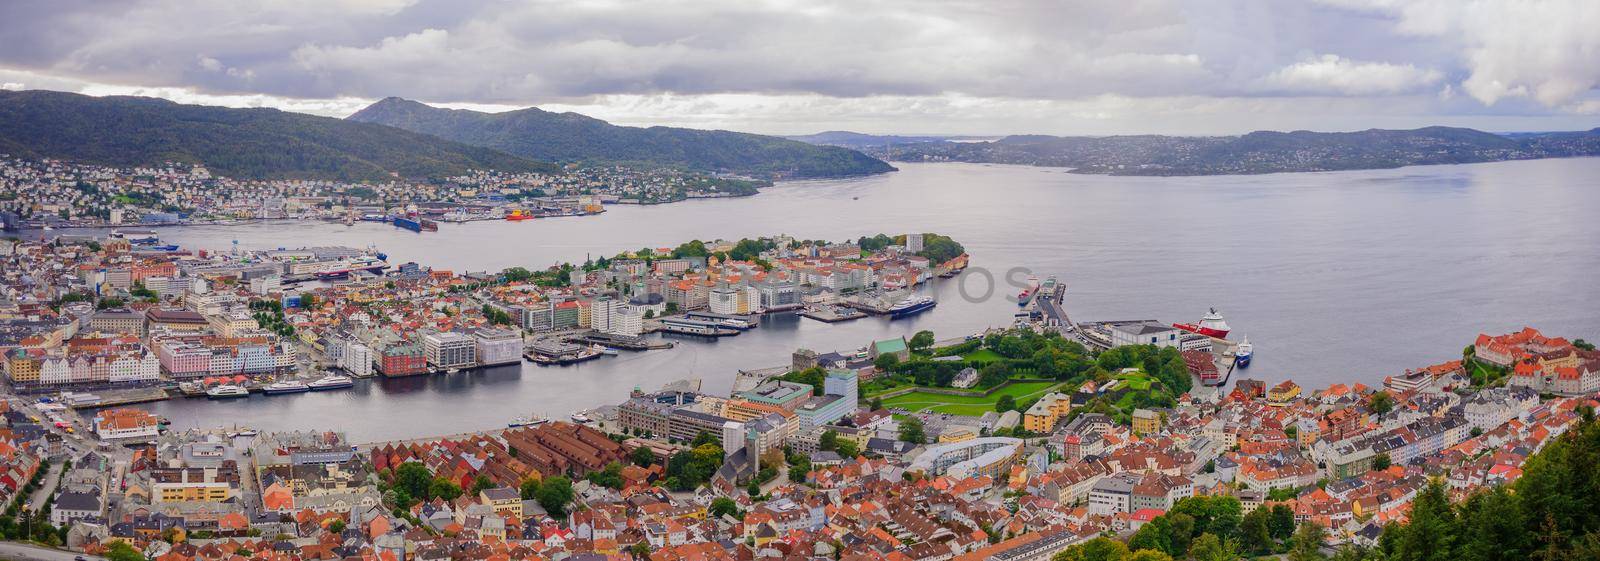 Panoramic views of the old city of Bergen by RnDmS